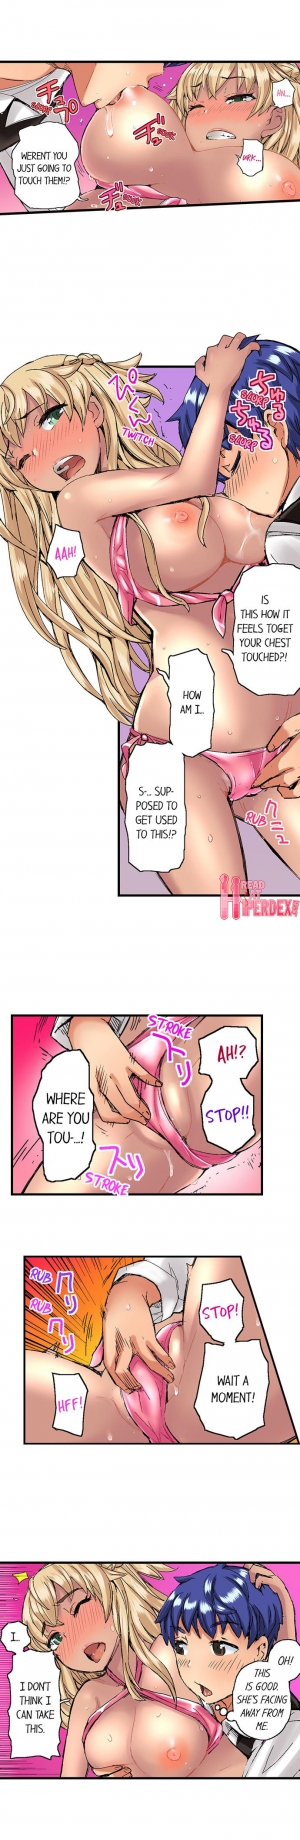 [Hiroyoshi Kira] Taking a Hot Tanned Chick’s Virginity (Ch.1-5) [English] - Page 38